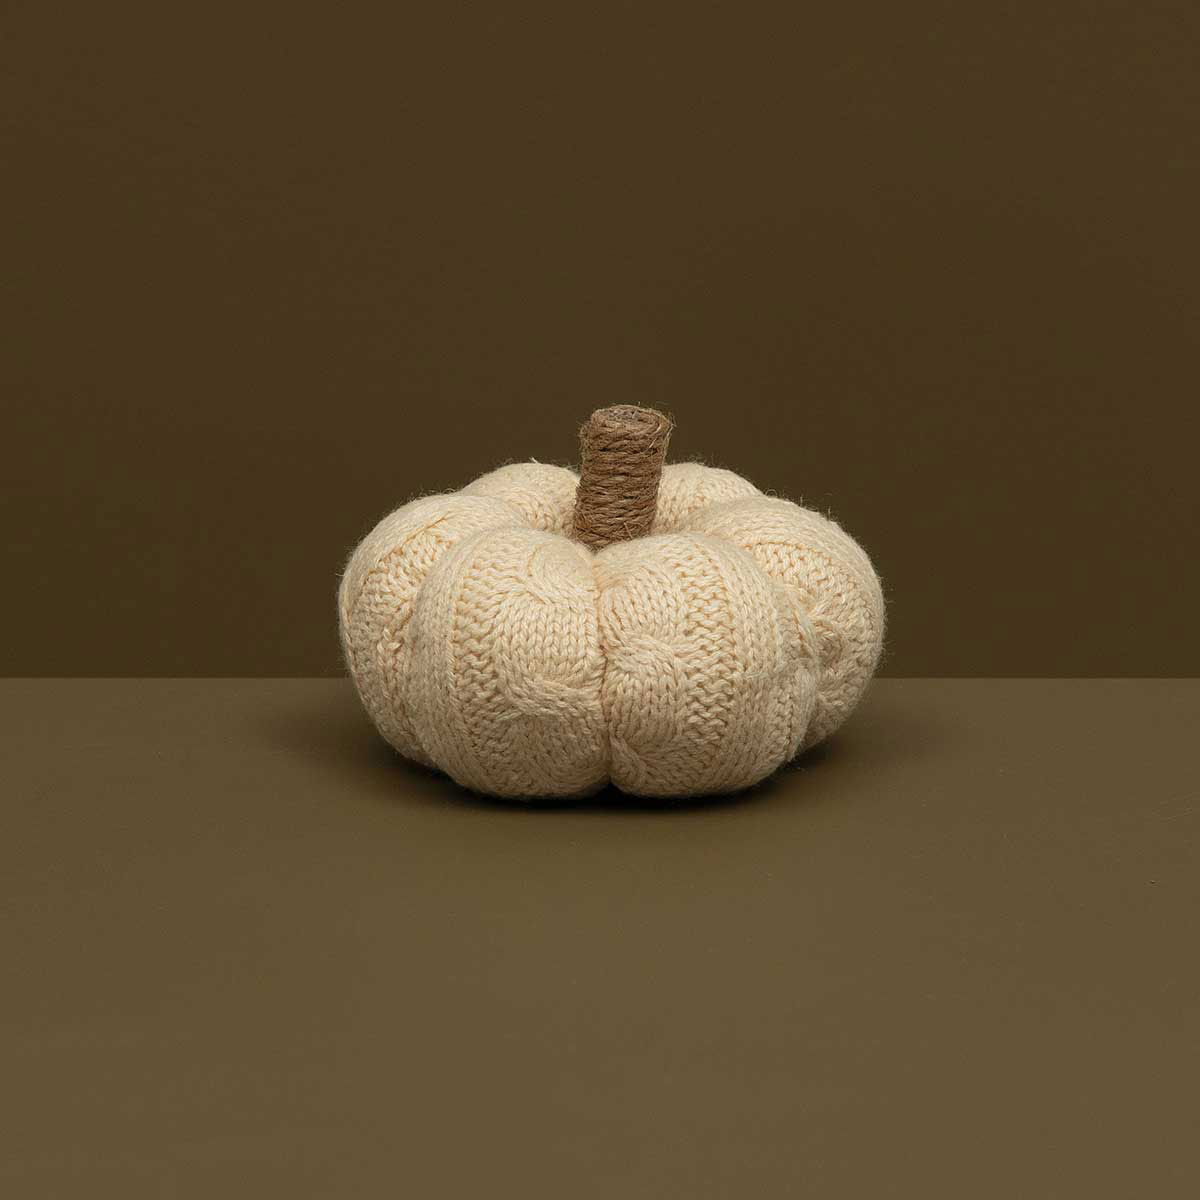 CABLE KNIT PUMPKIN PLUSH CREACHM WITH TWINE STEM SMALL 5"X3.5" - Click Image to Close